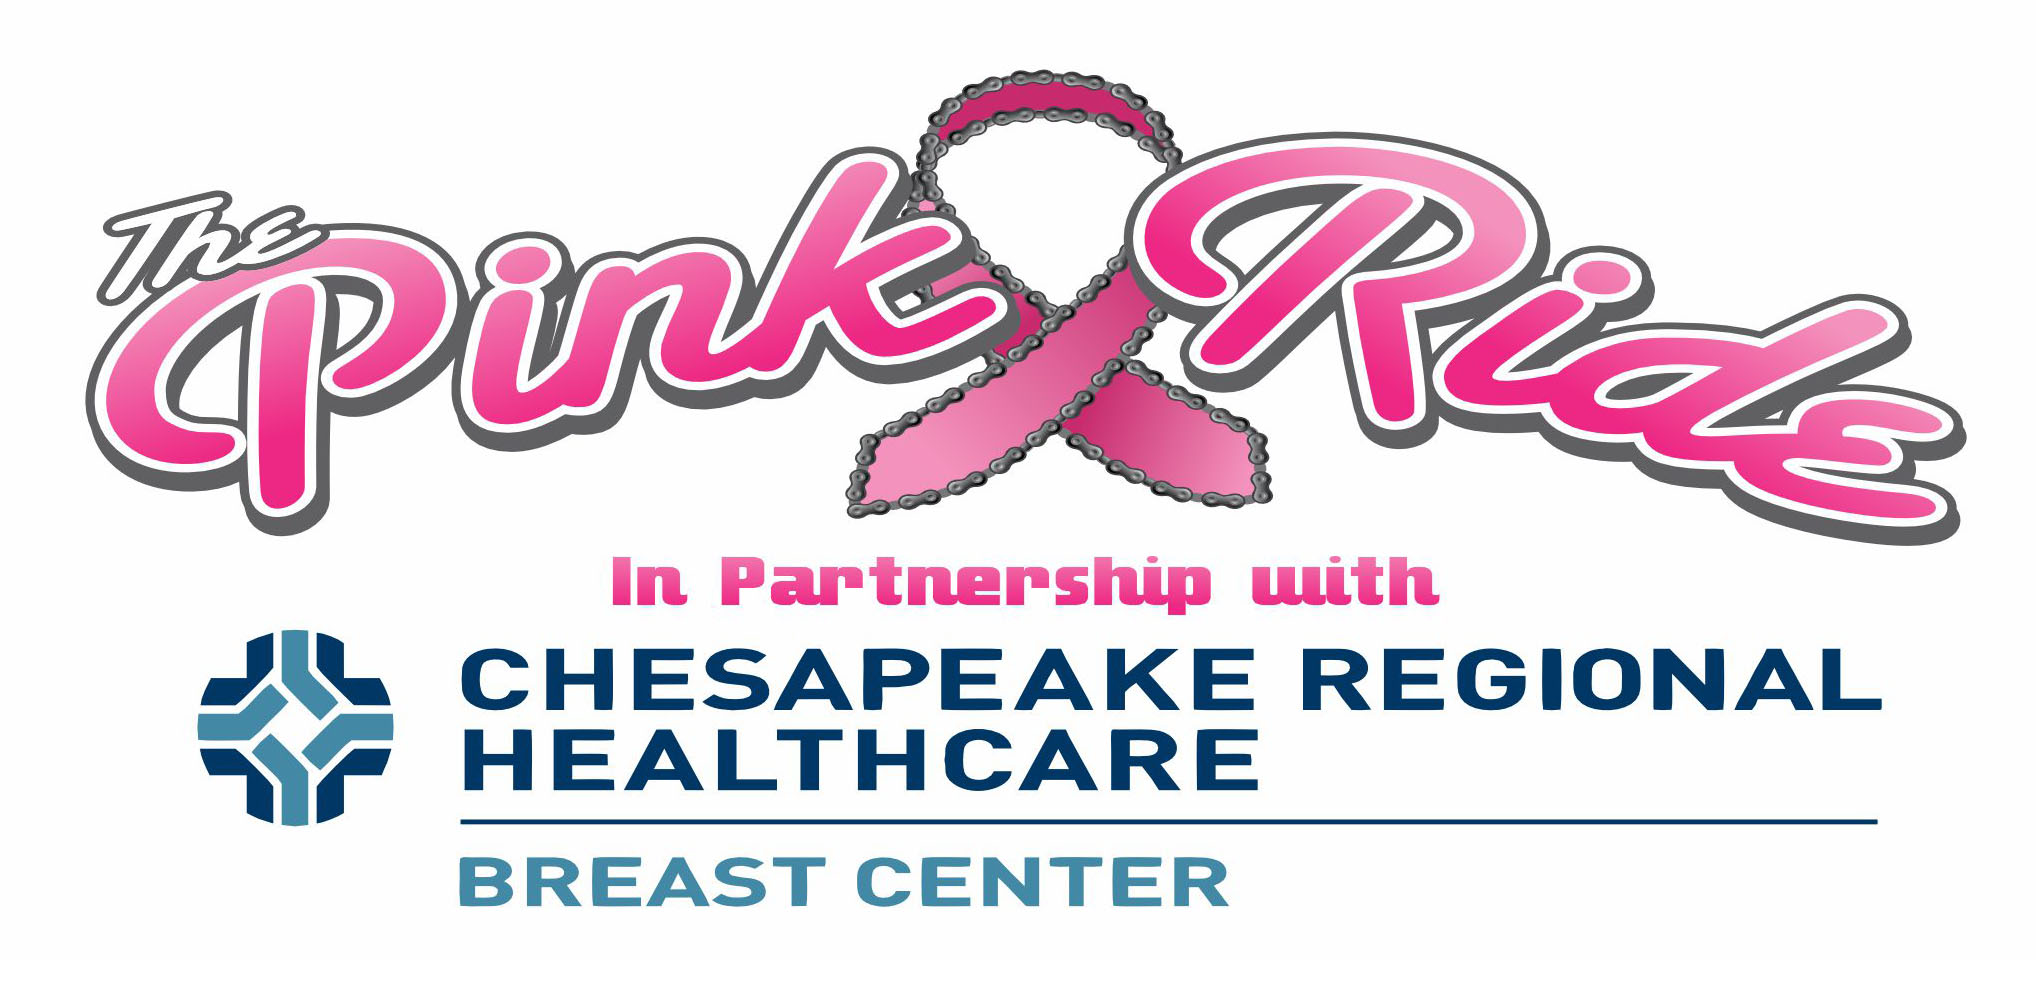 The Pink Ride in partnership with Chesapeake Regional Health Care Breast Center